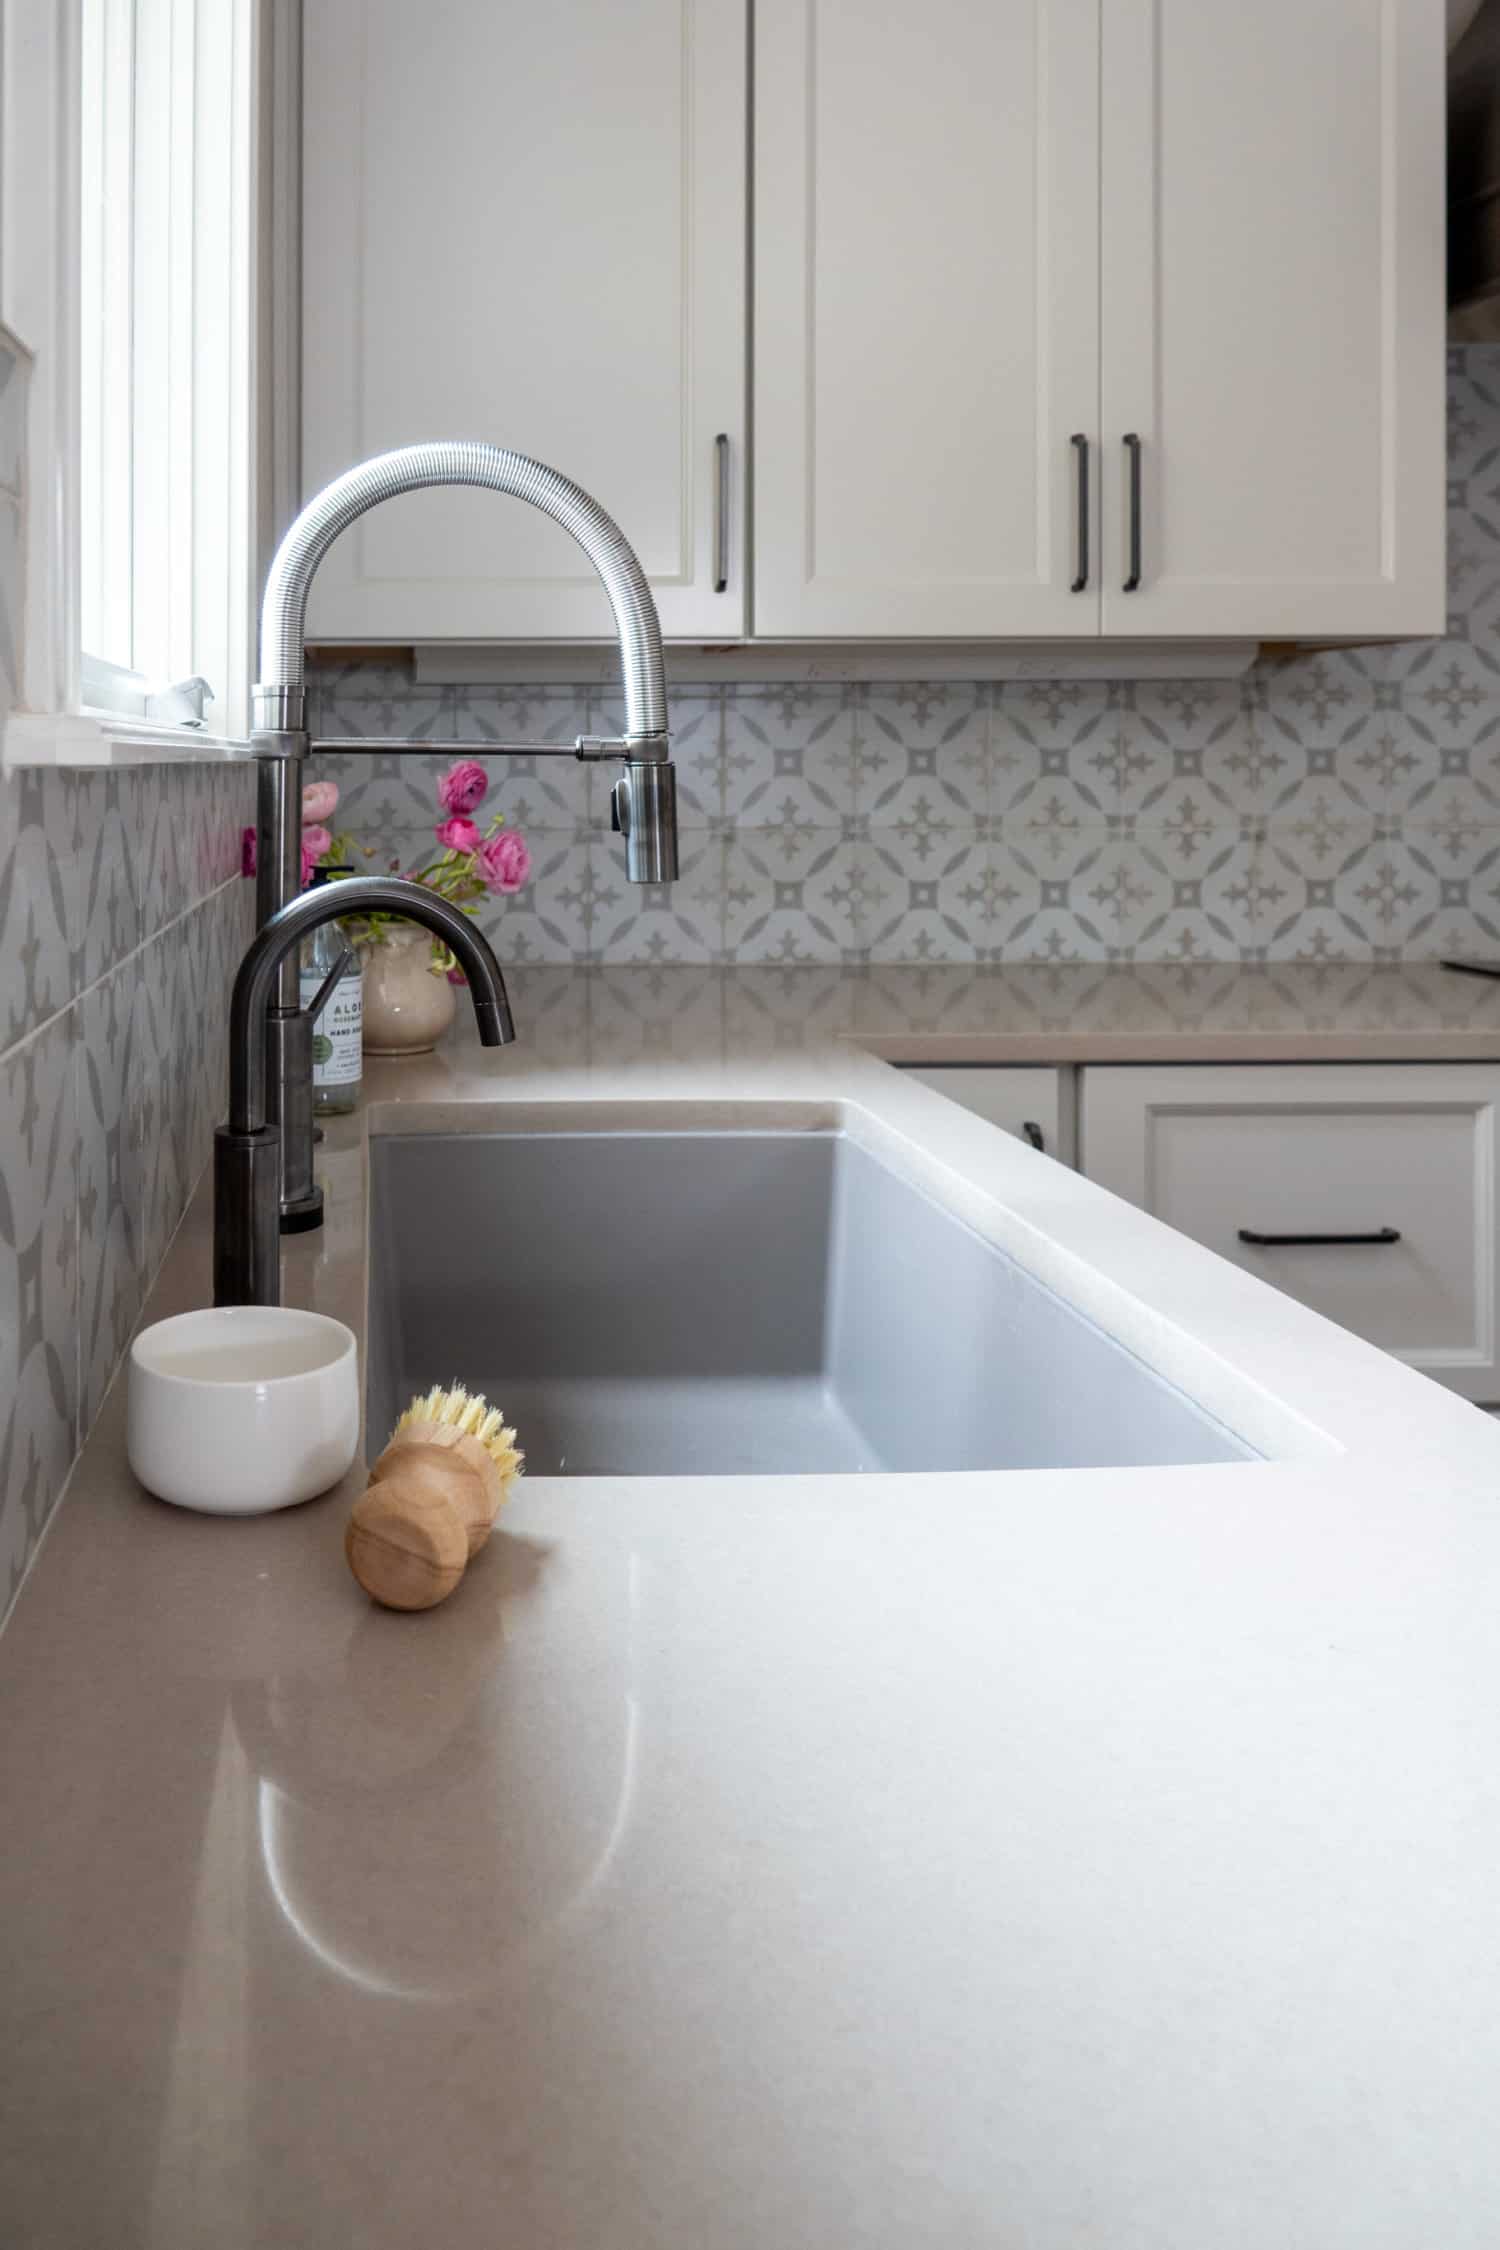 Nicholas Design Build | Remodel a kitchen with white cabinets and a white sink.